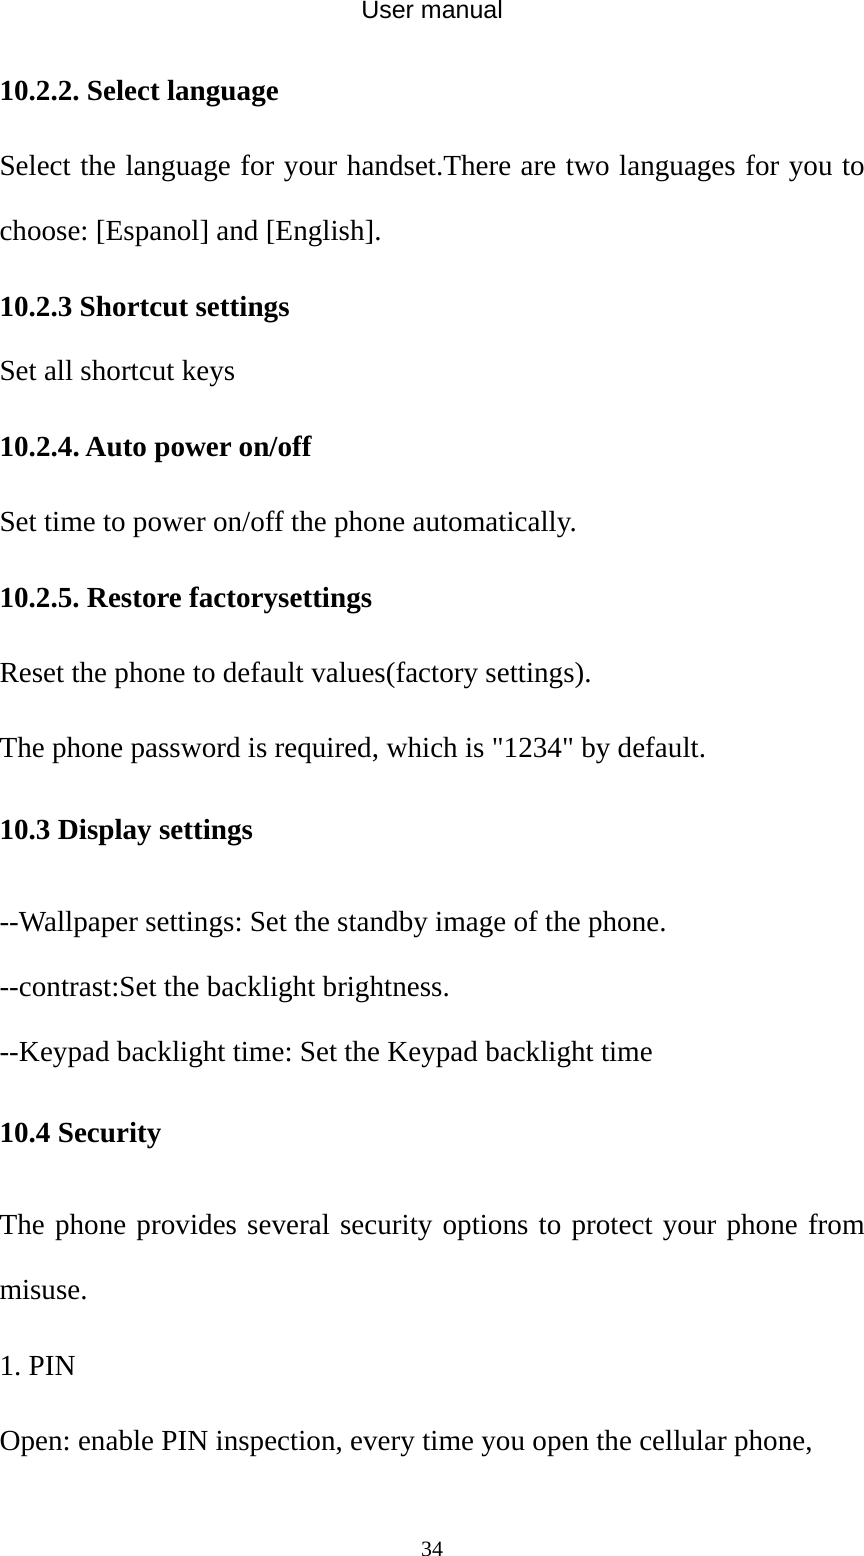 User manual  3410.2.2. Select language Select the language for your handset.There are two languages for you to choose: [Espanol] and [English]. 10.2.3 Shortcut settings Set all shortcut keys   10.2.4. Auto power on/off Set time to power on/off the phone automatically. 10.2.5. Restore factorysettings Reset the phone to default values(factory settings). The phone password is required, which is &quot;1234&quot; by default. 10.3 Display settings --Wallpaper settings: Set the standby image of the phone. --contrast:Set the backlight brightness. --Keypad backlight time: Set the Keypad backlight time 10.4 Security The phone provides several security options to protect your phone from misuse. 1. PIN Open: enable PIN inspection, every time you open the cellular phone, 